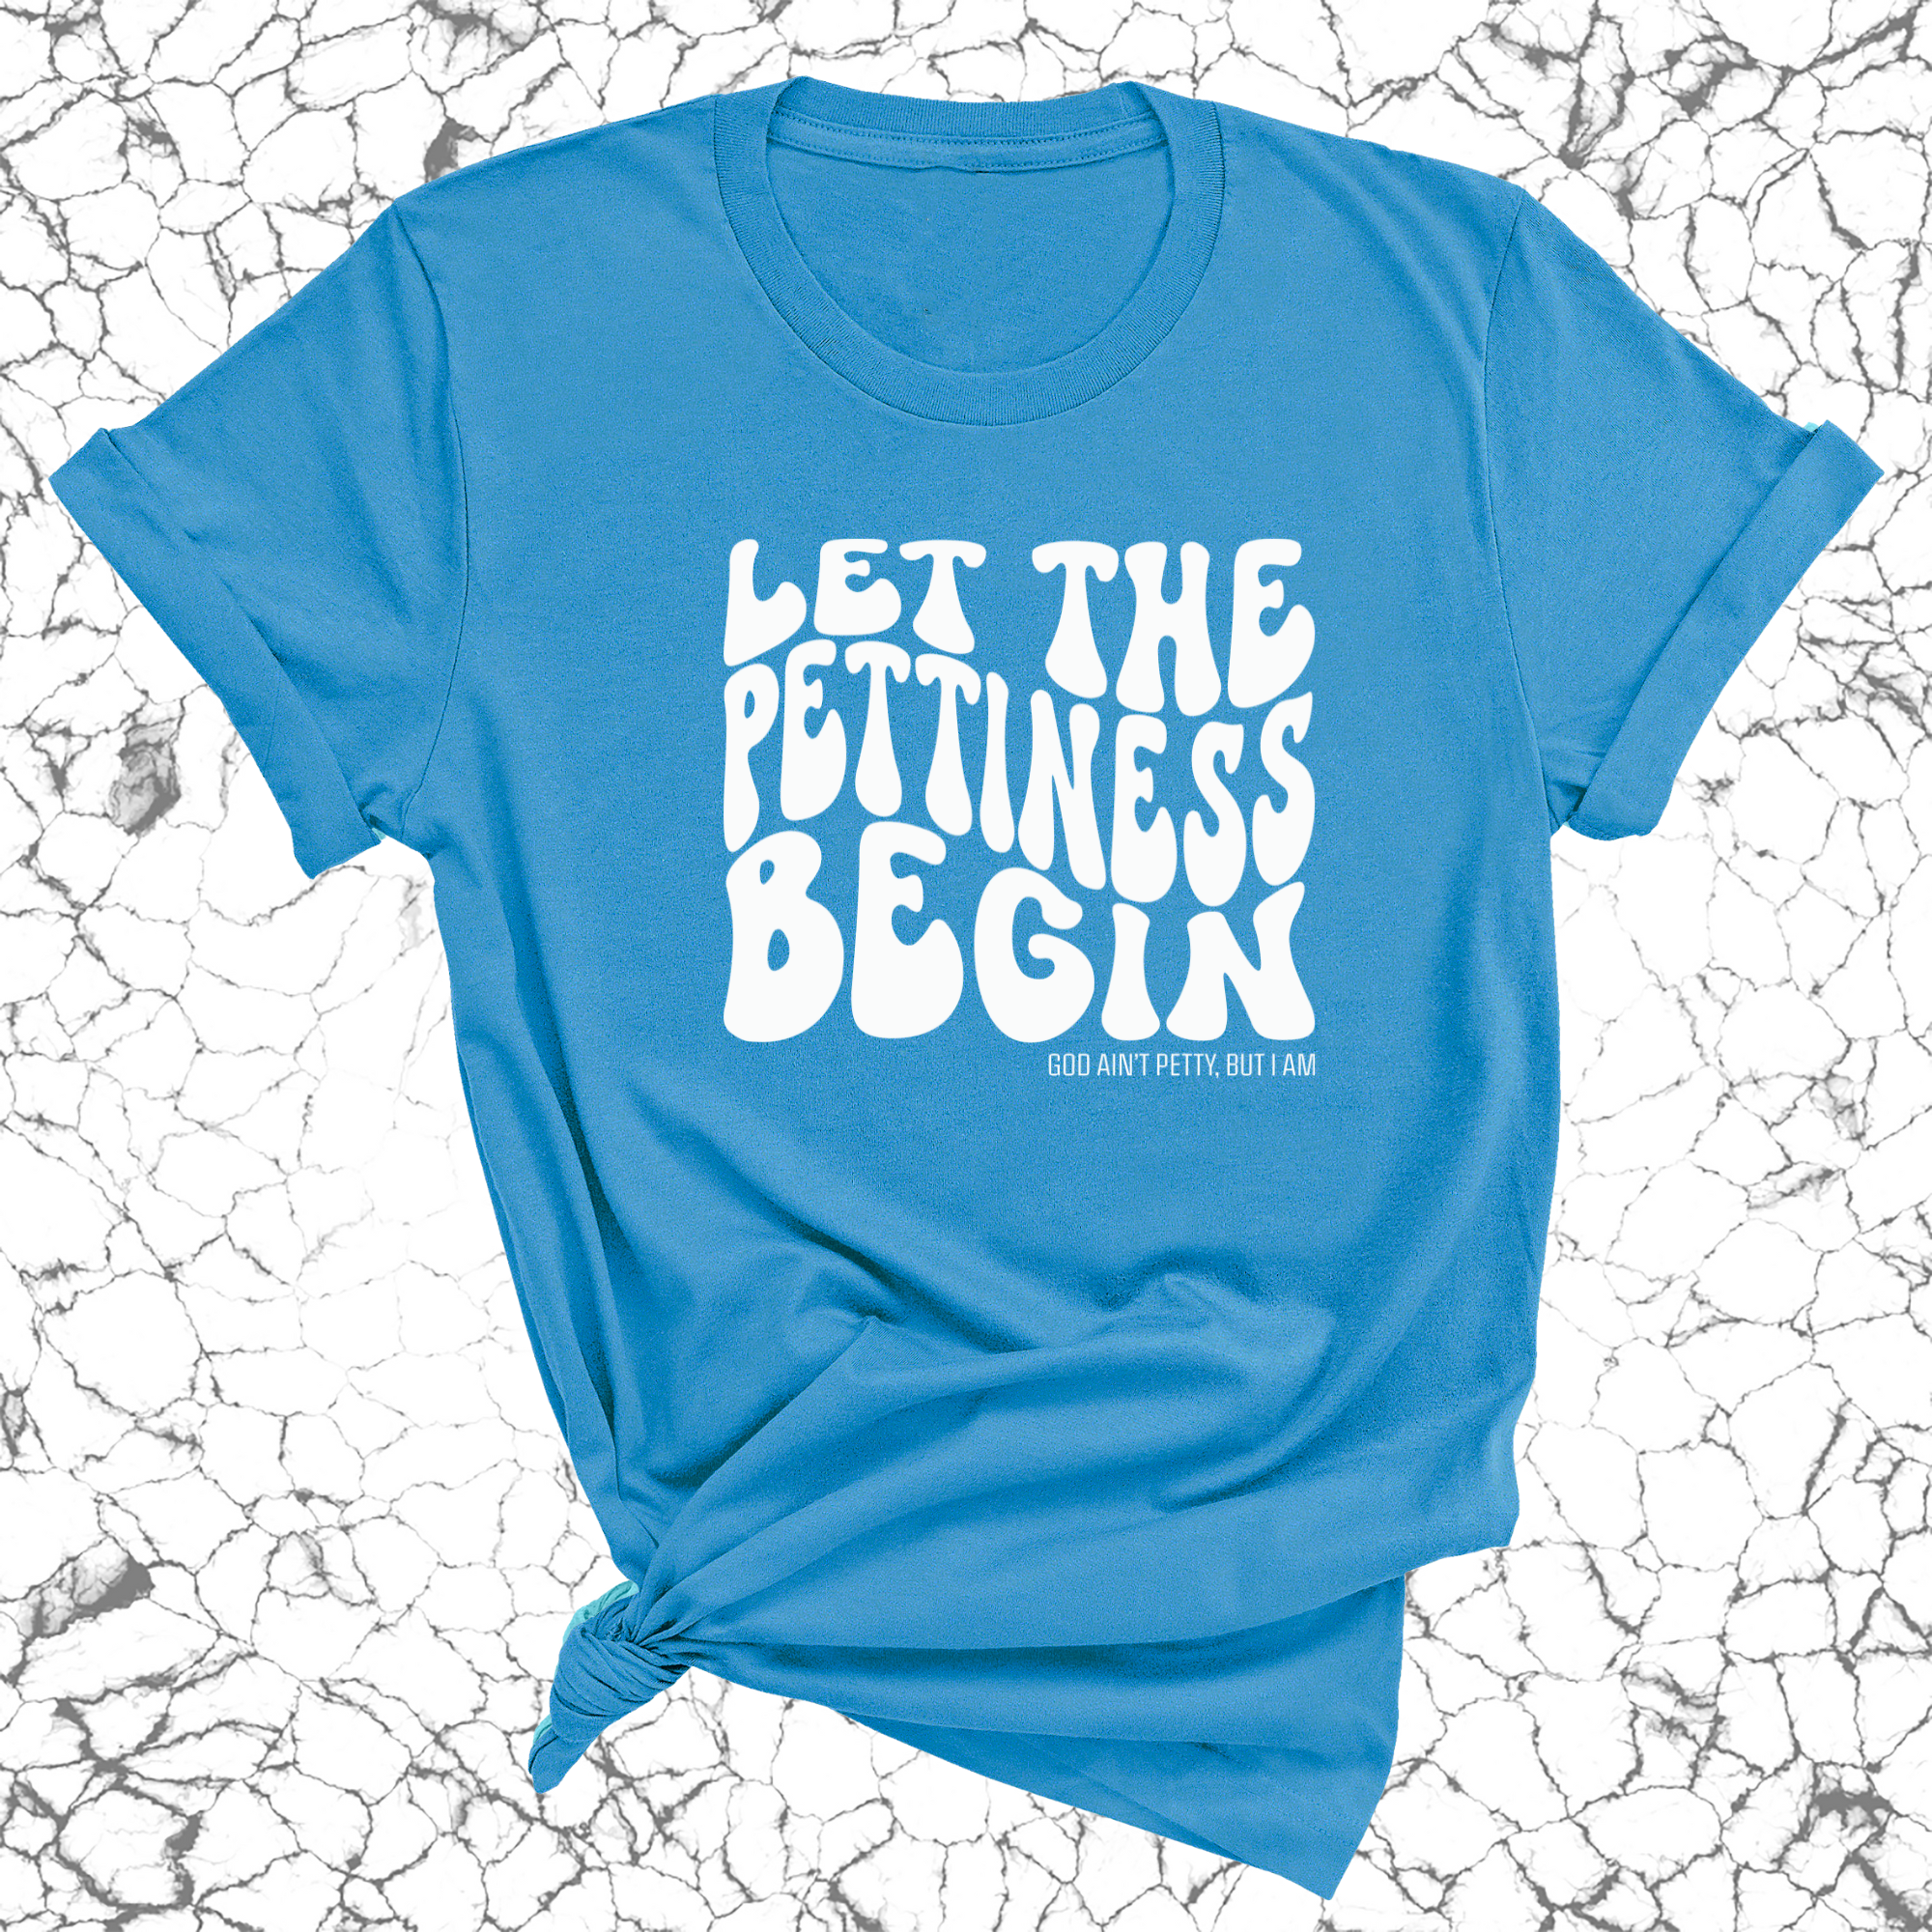 Let the Pettiness Begin Unisex Tee-T-Shirt-The Original God Ain't Petty But I Am